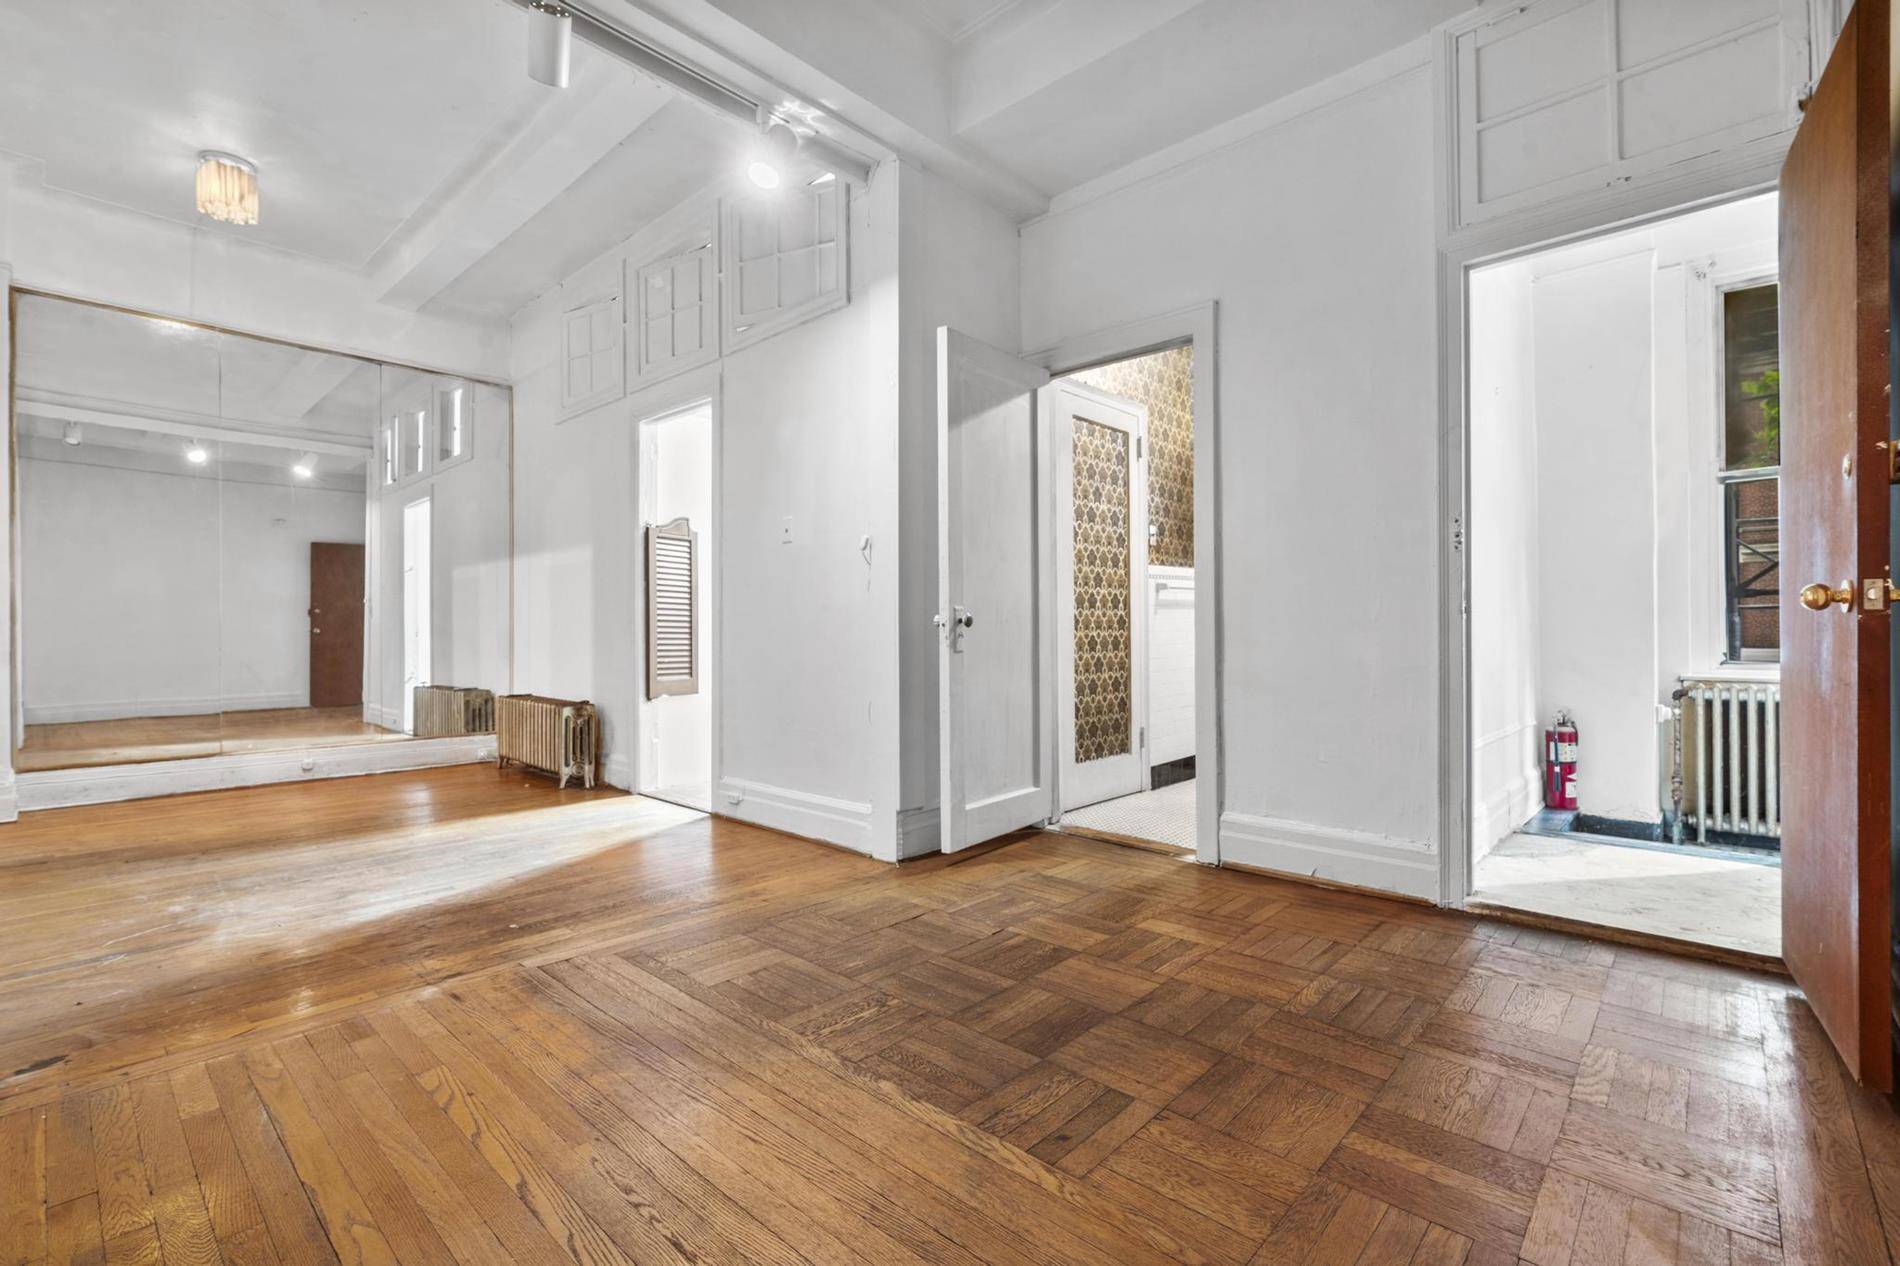 Maisonette ! Have your own private entrance off of West End Avenue between 82nd and 83rd Street.